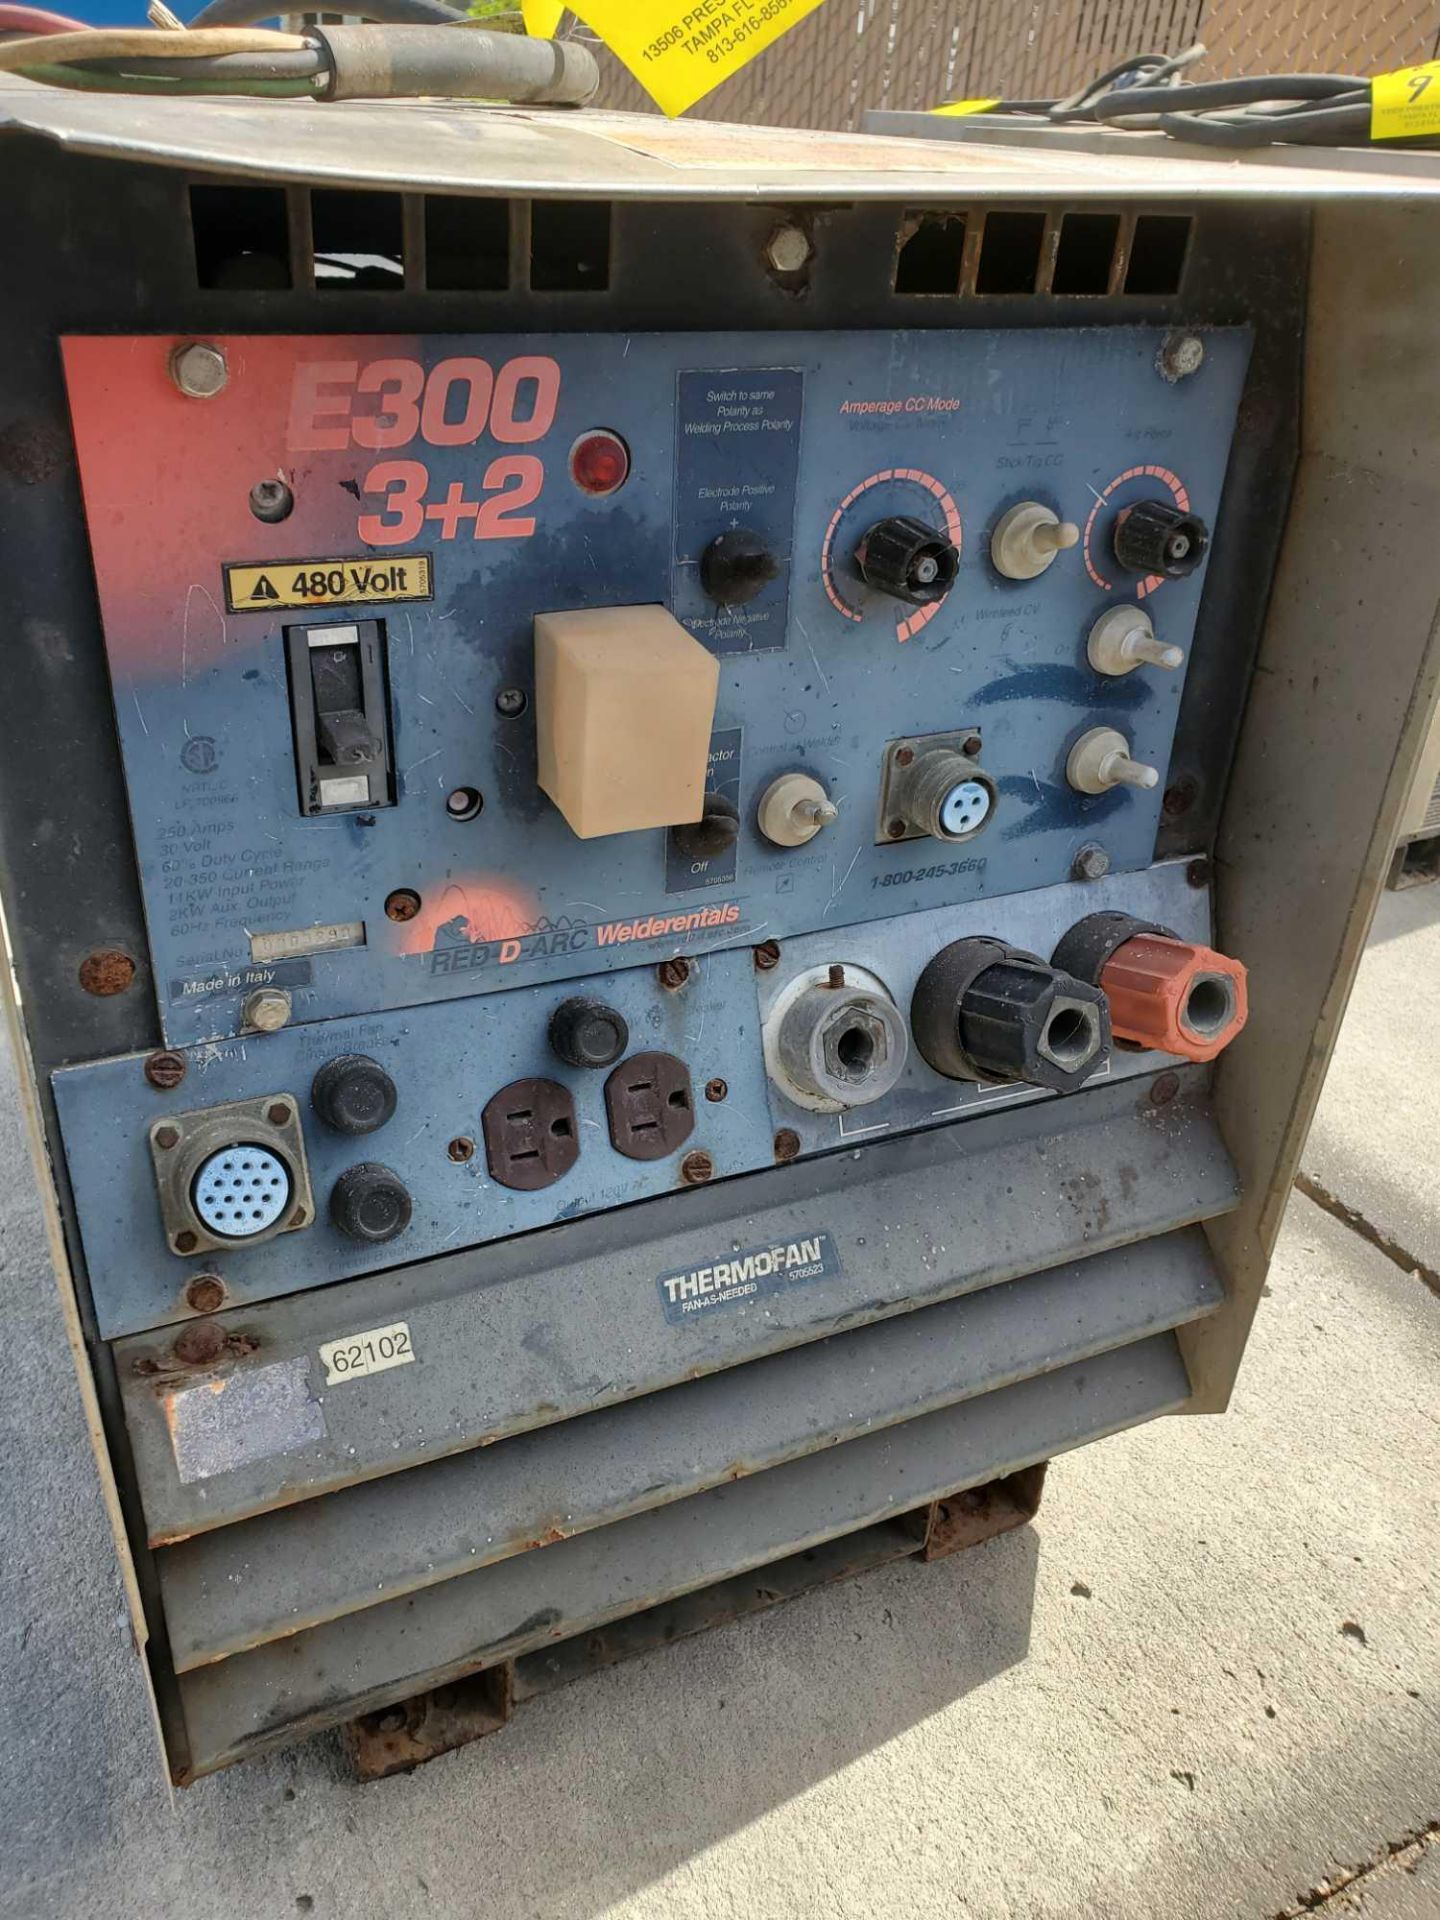 RED-D-ARC E300 CONTRACTOR 3 + 2 WELDER 3PH 480/600V - Image 2 of 4